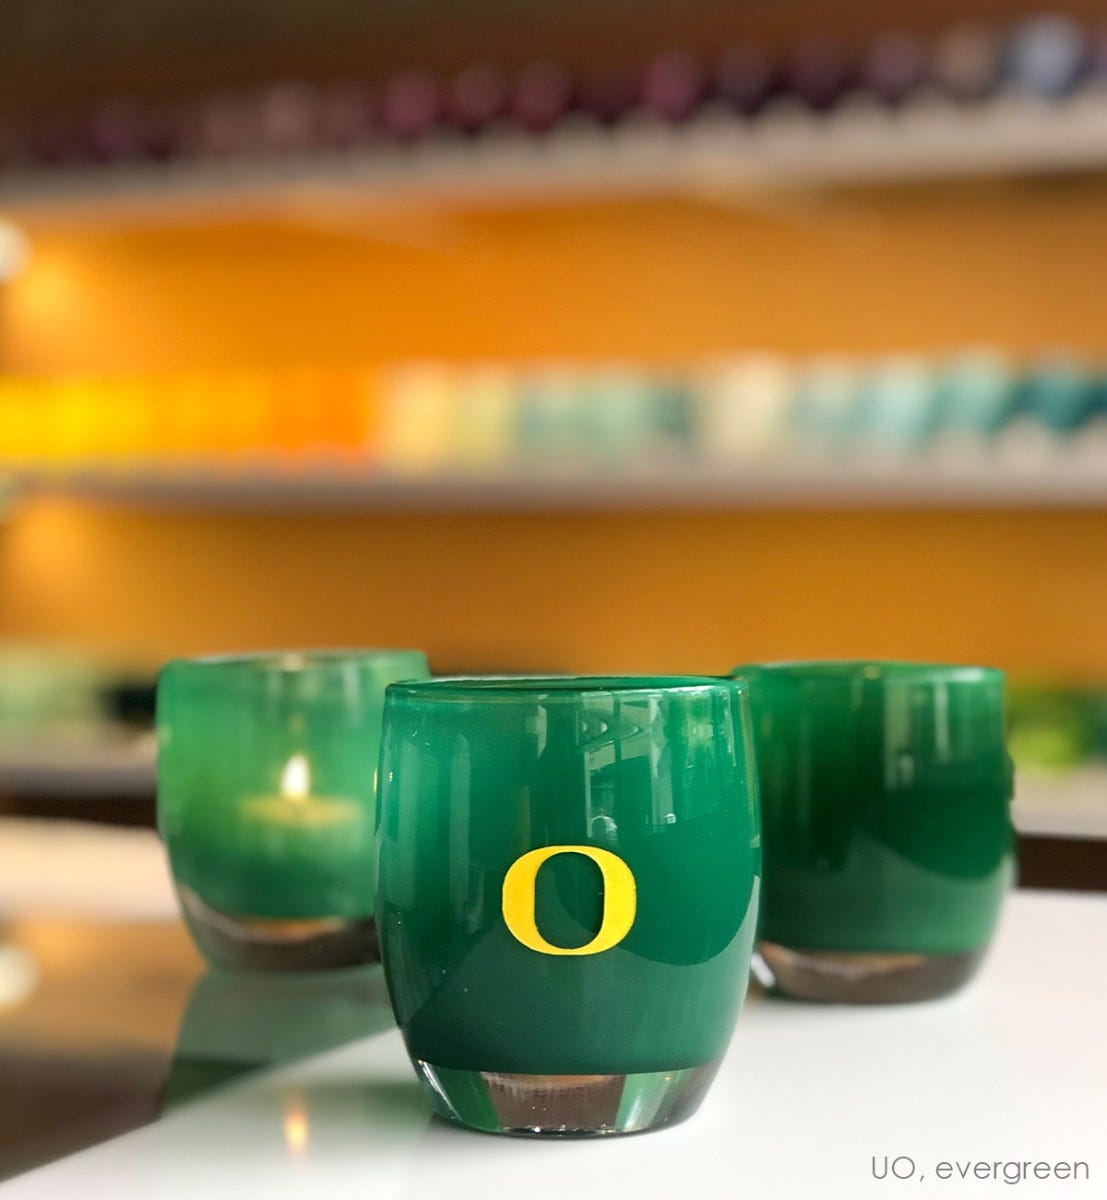 UO, green with sandblasted University of Oregon etching hand painted in yellow, hand-blown glass votive candle holder. Paired with evergreen on white and clear store table.